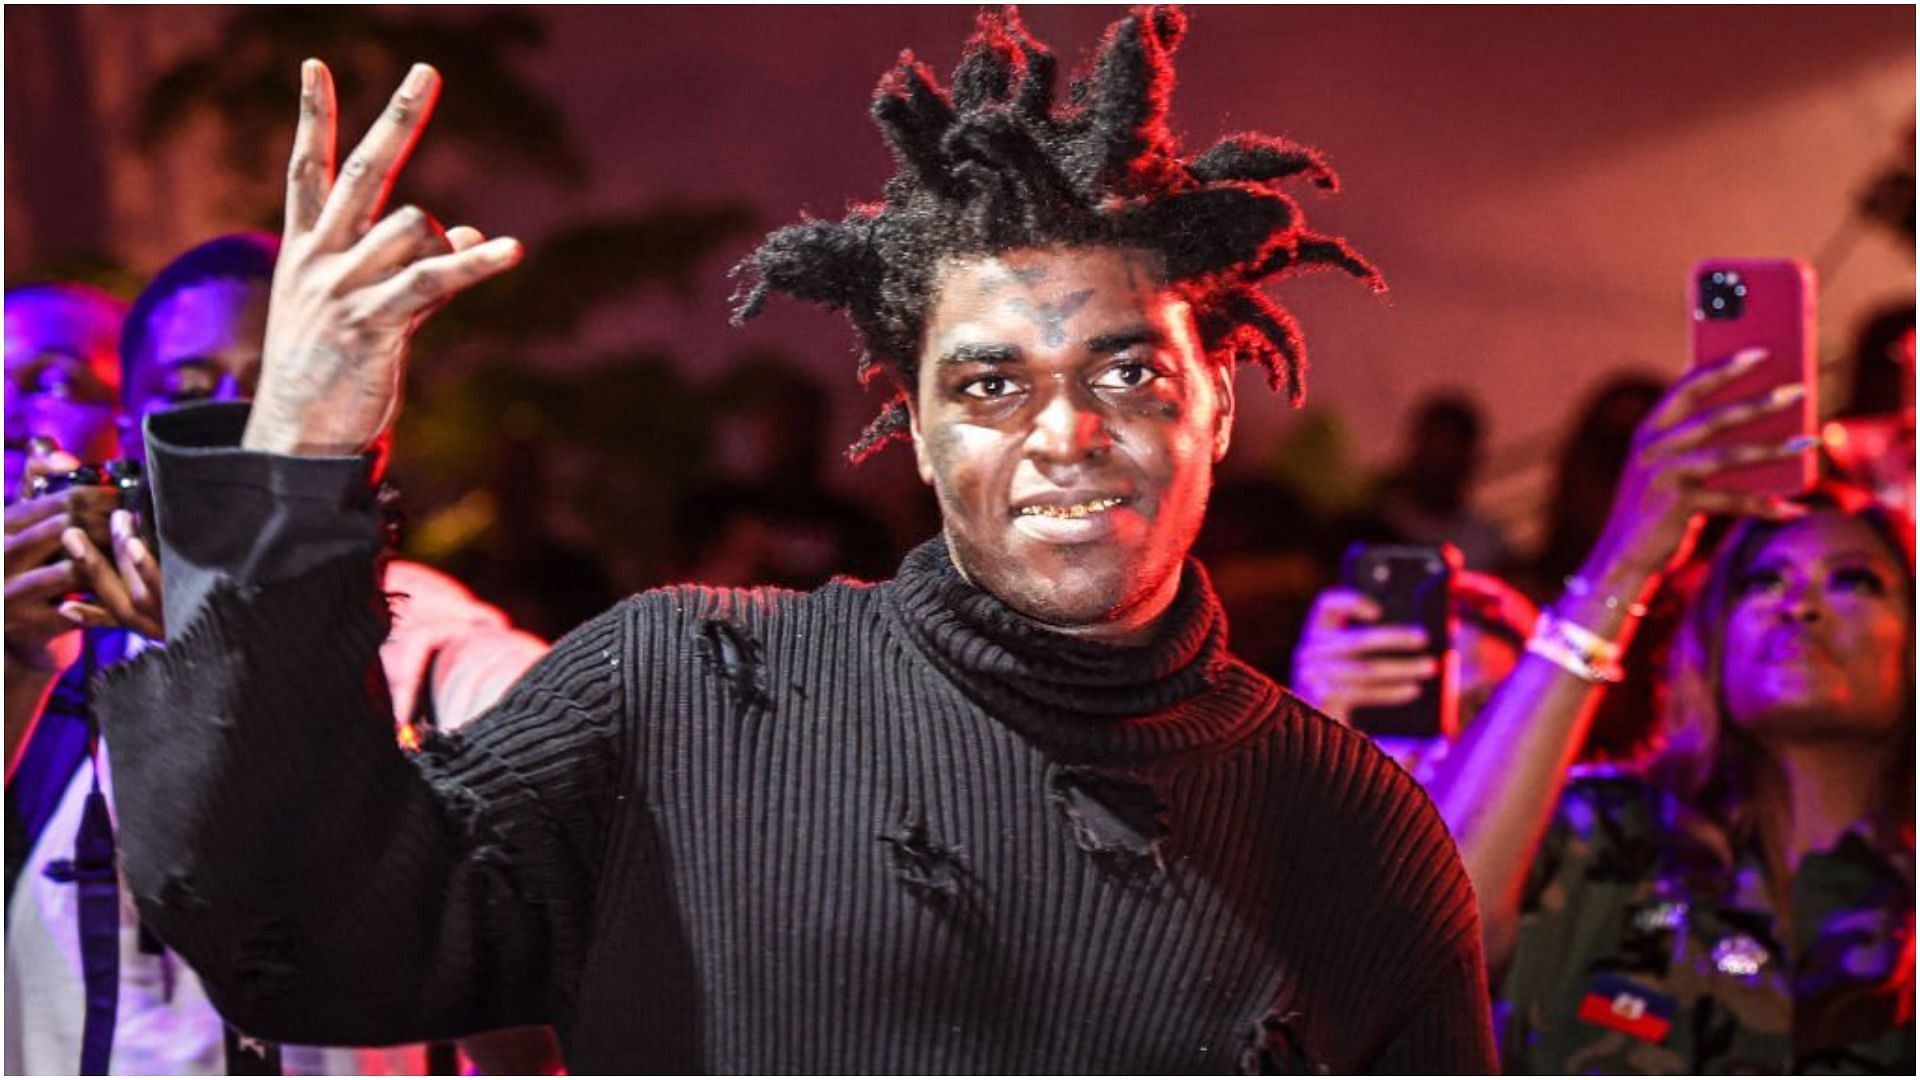 Kodak Black was recently released from the hospital after being shot (Image via Getty Images/John Parra)